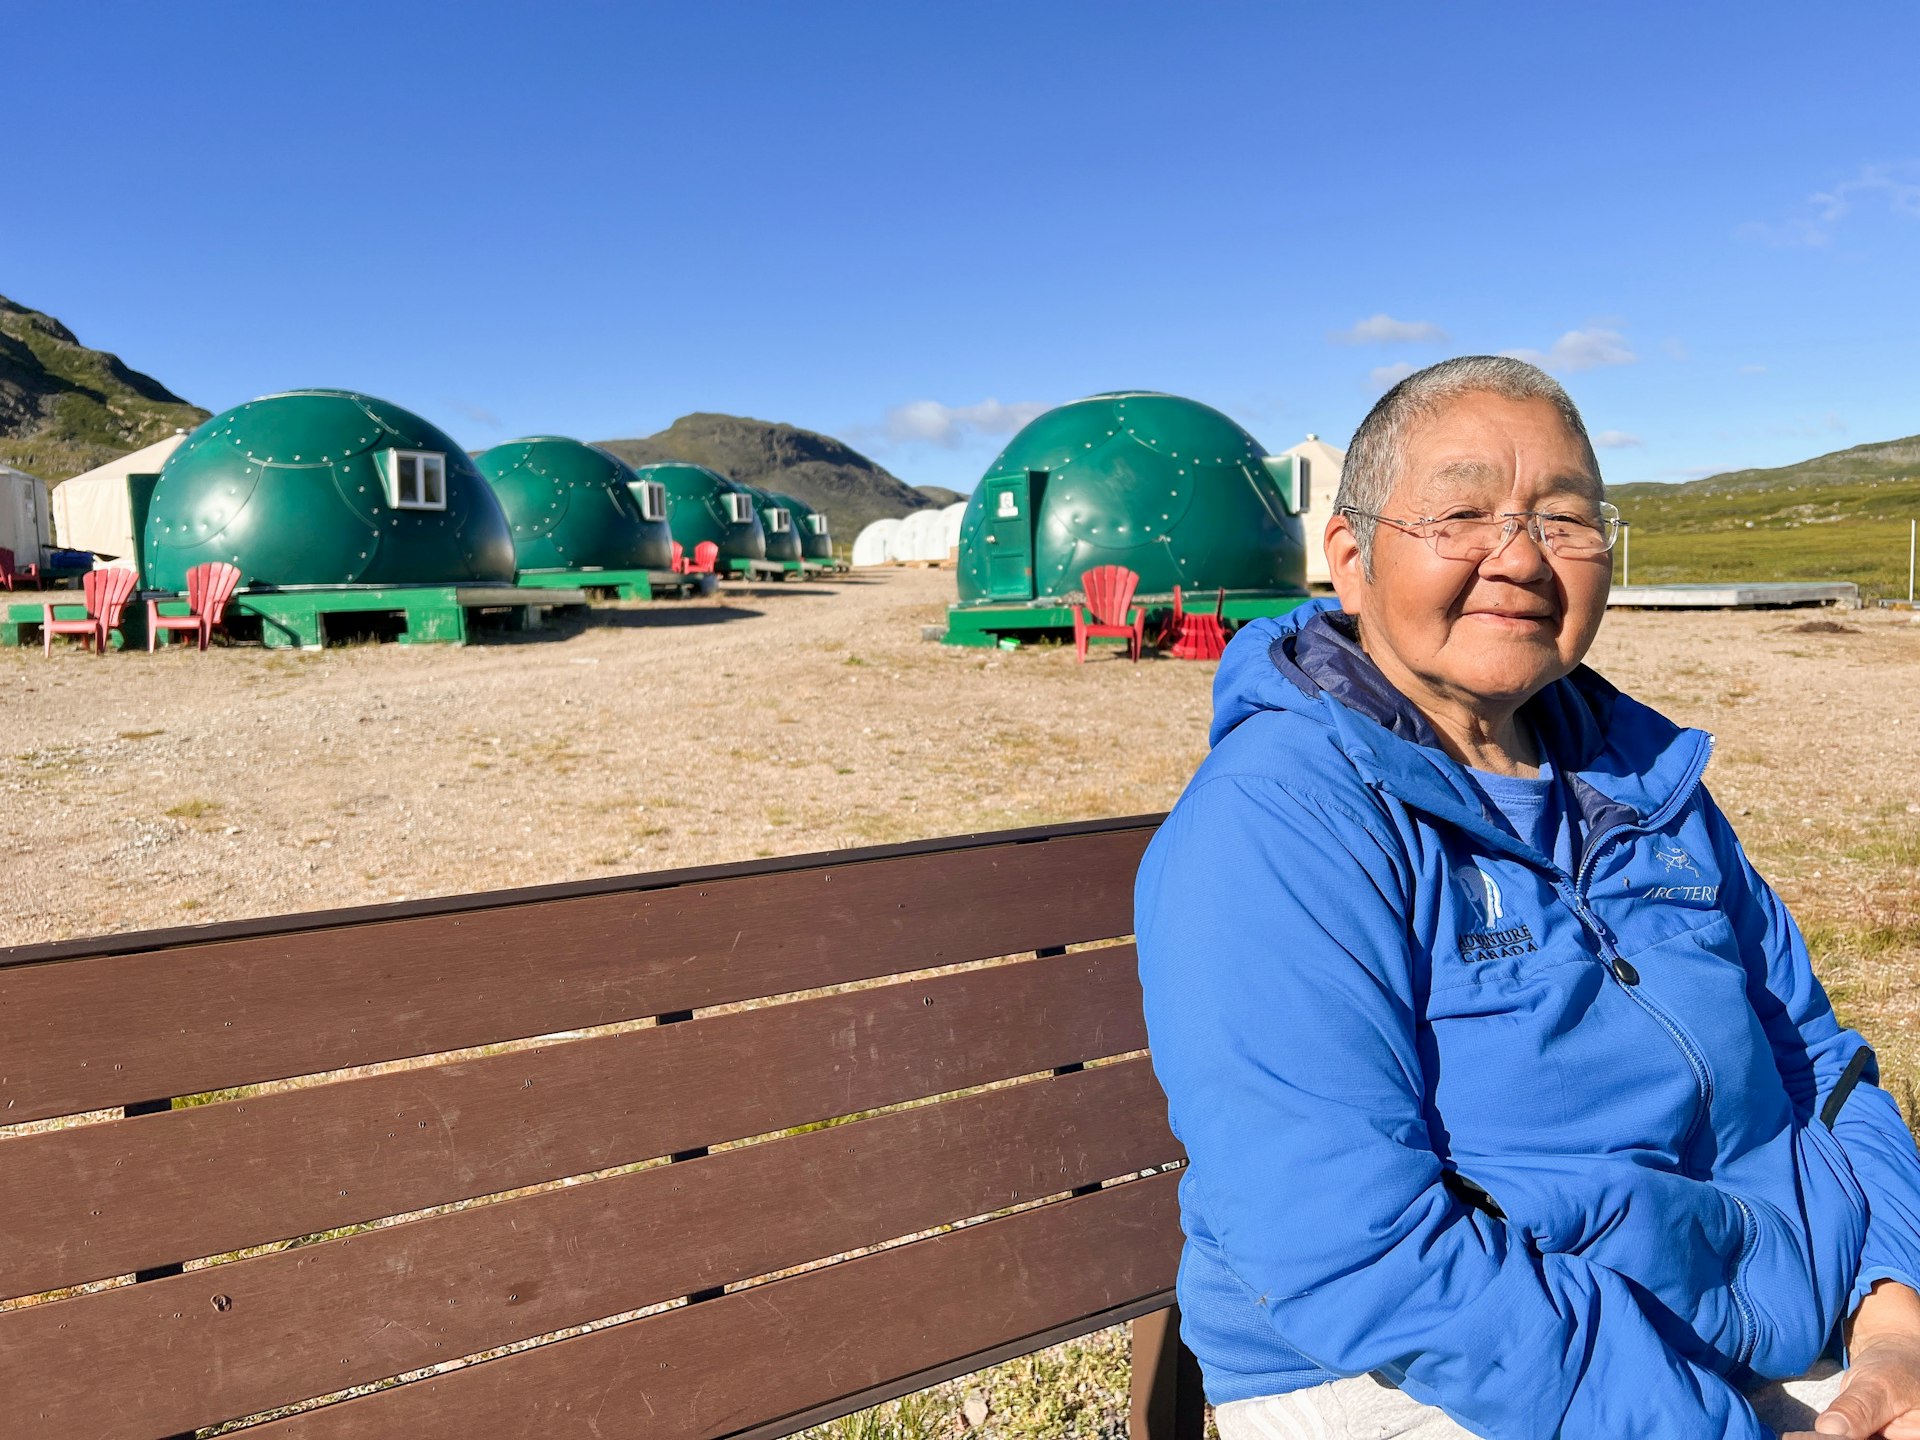 A woman sits on a bench in front of round green structures that form part of Base Camp